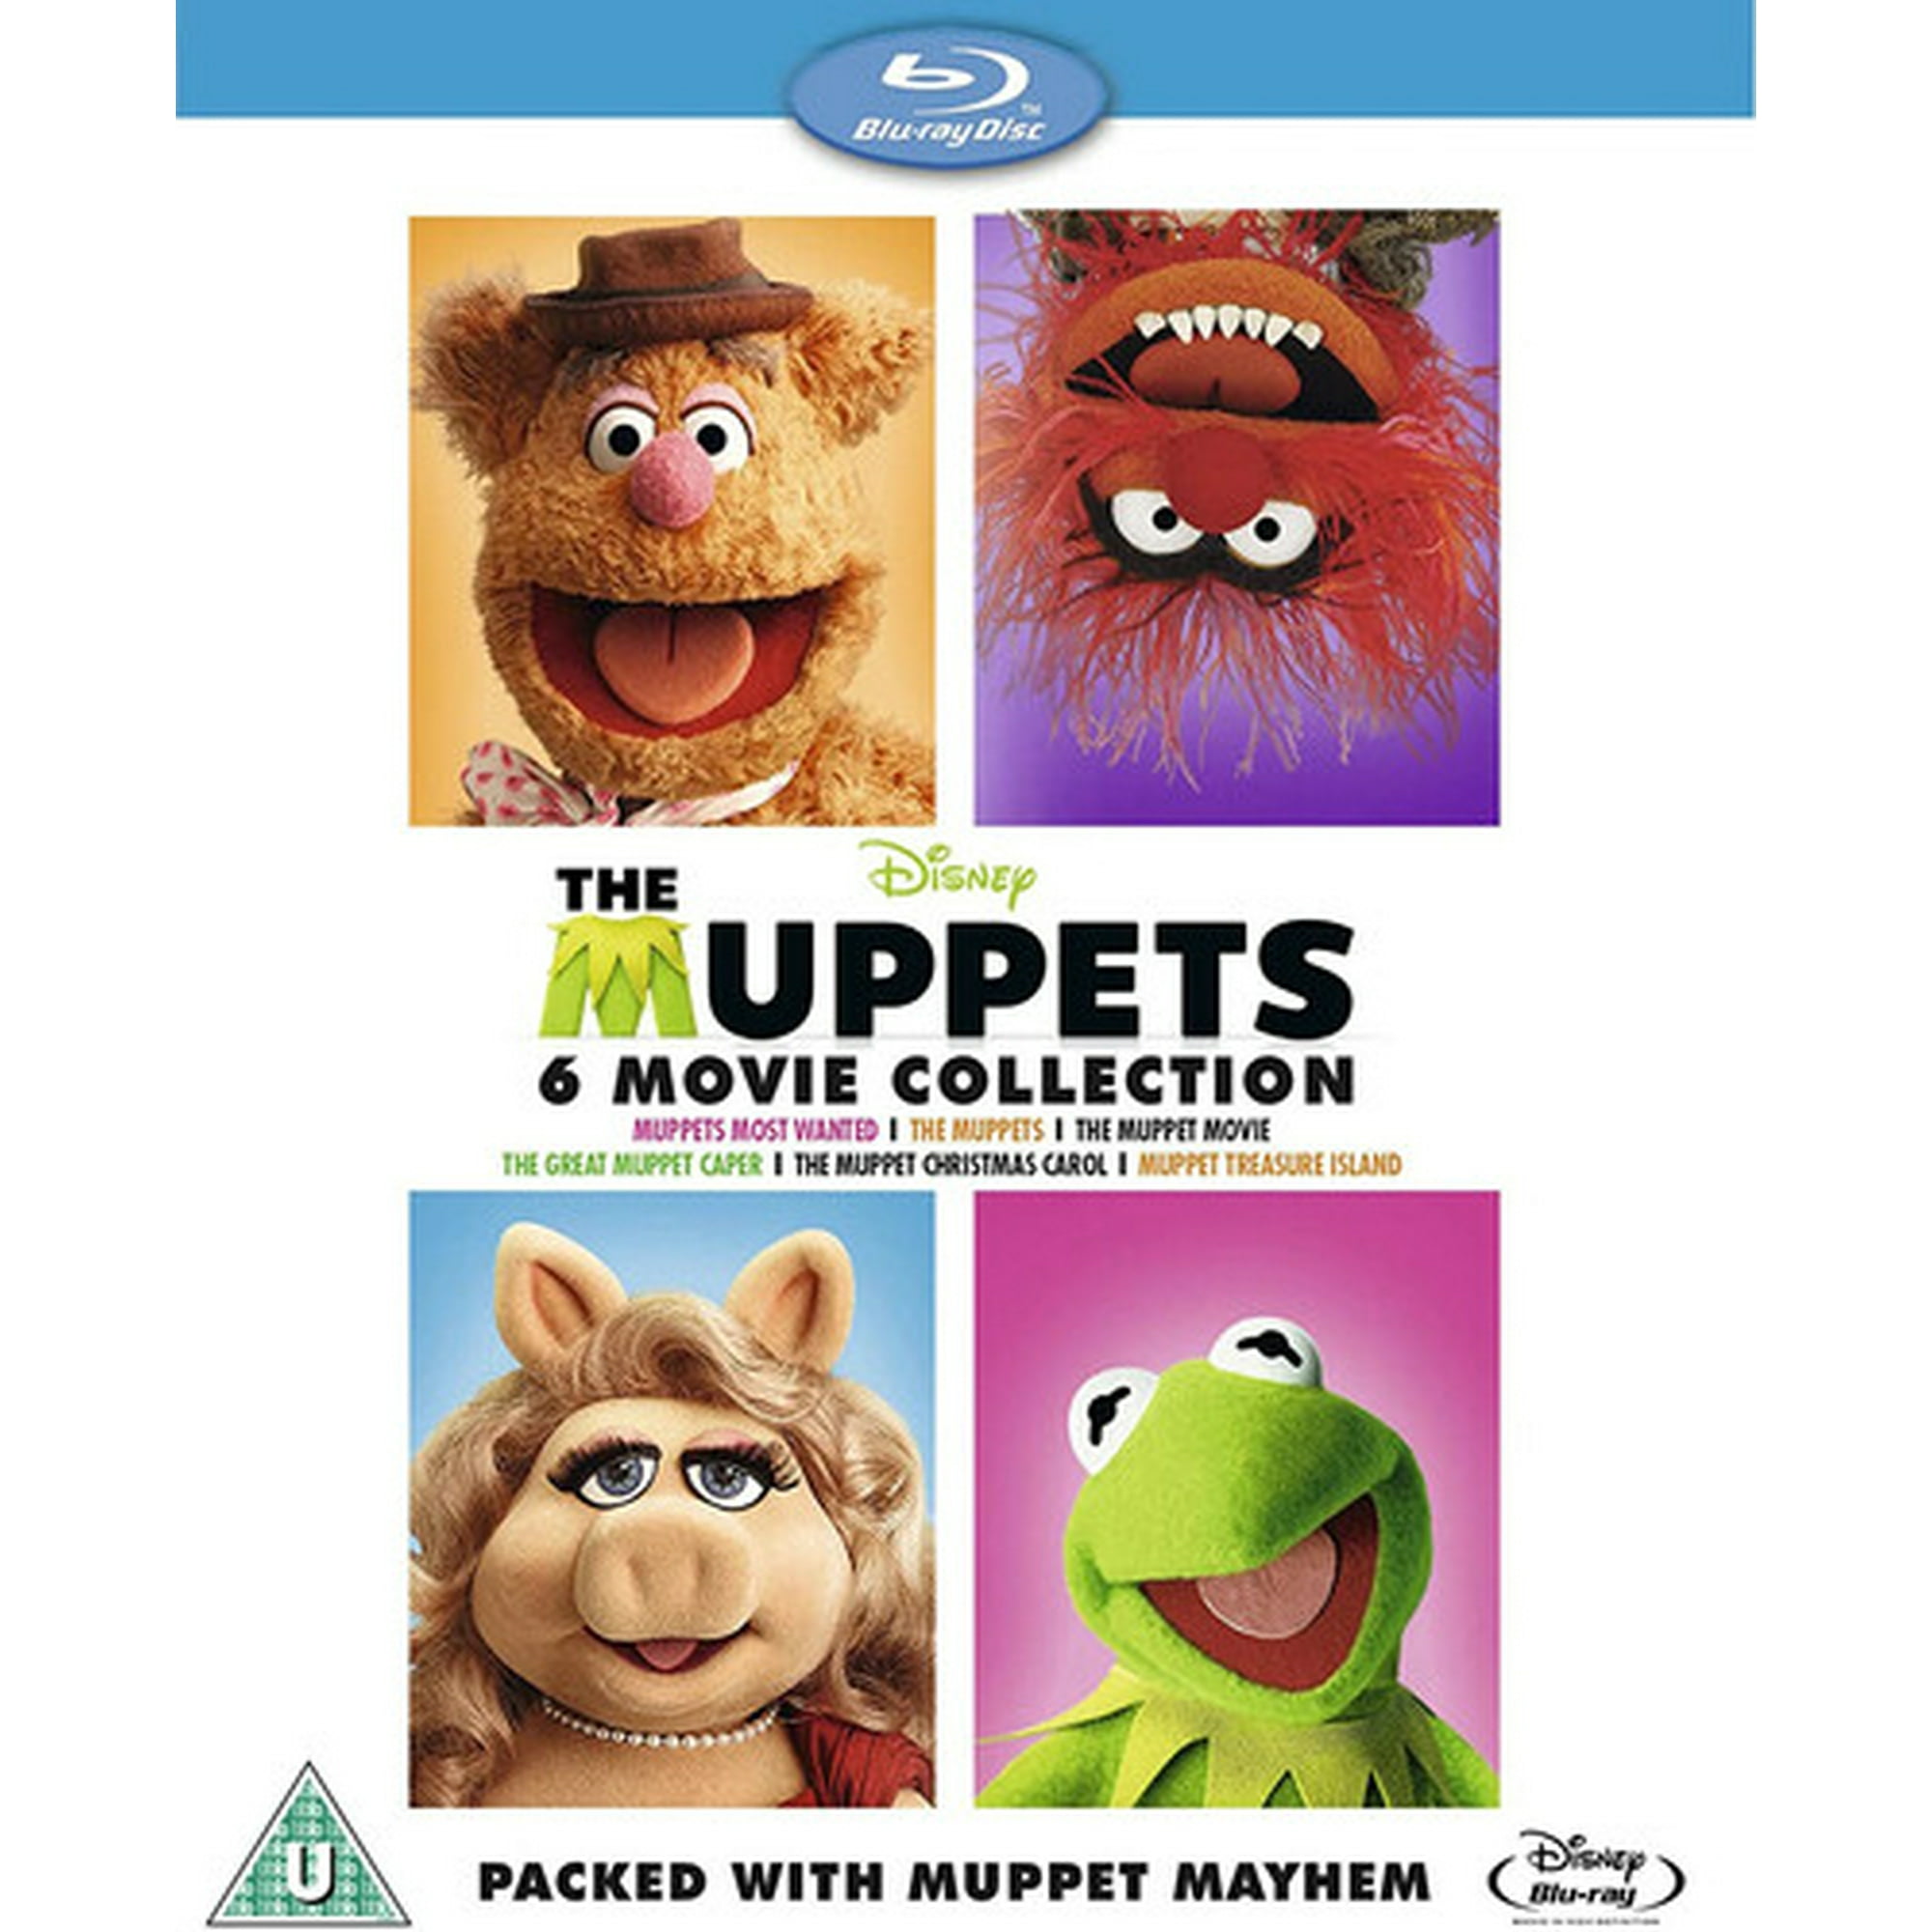 The Muppets: 6 Movie Collection (Blu-ray)